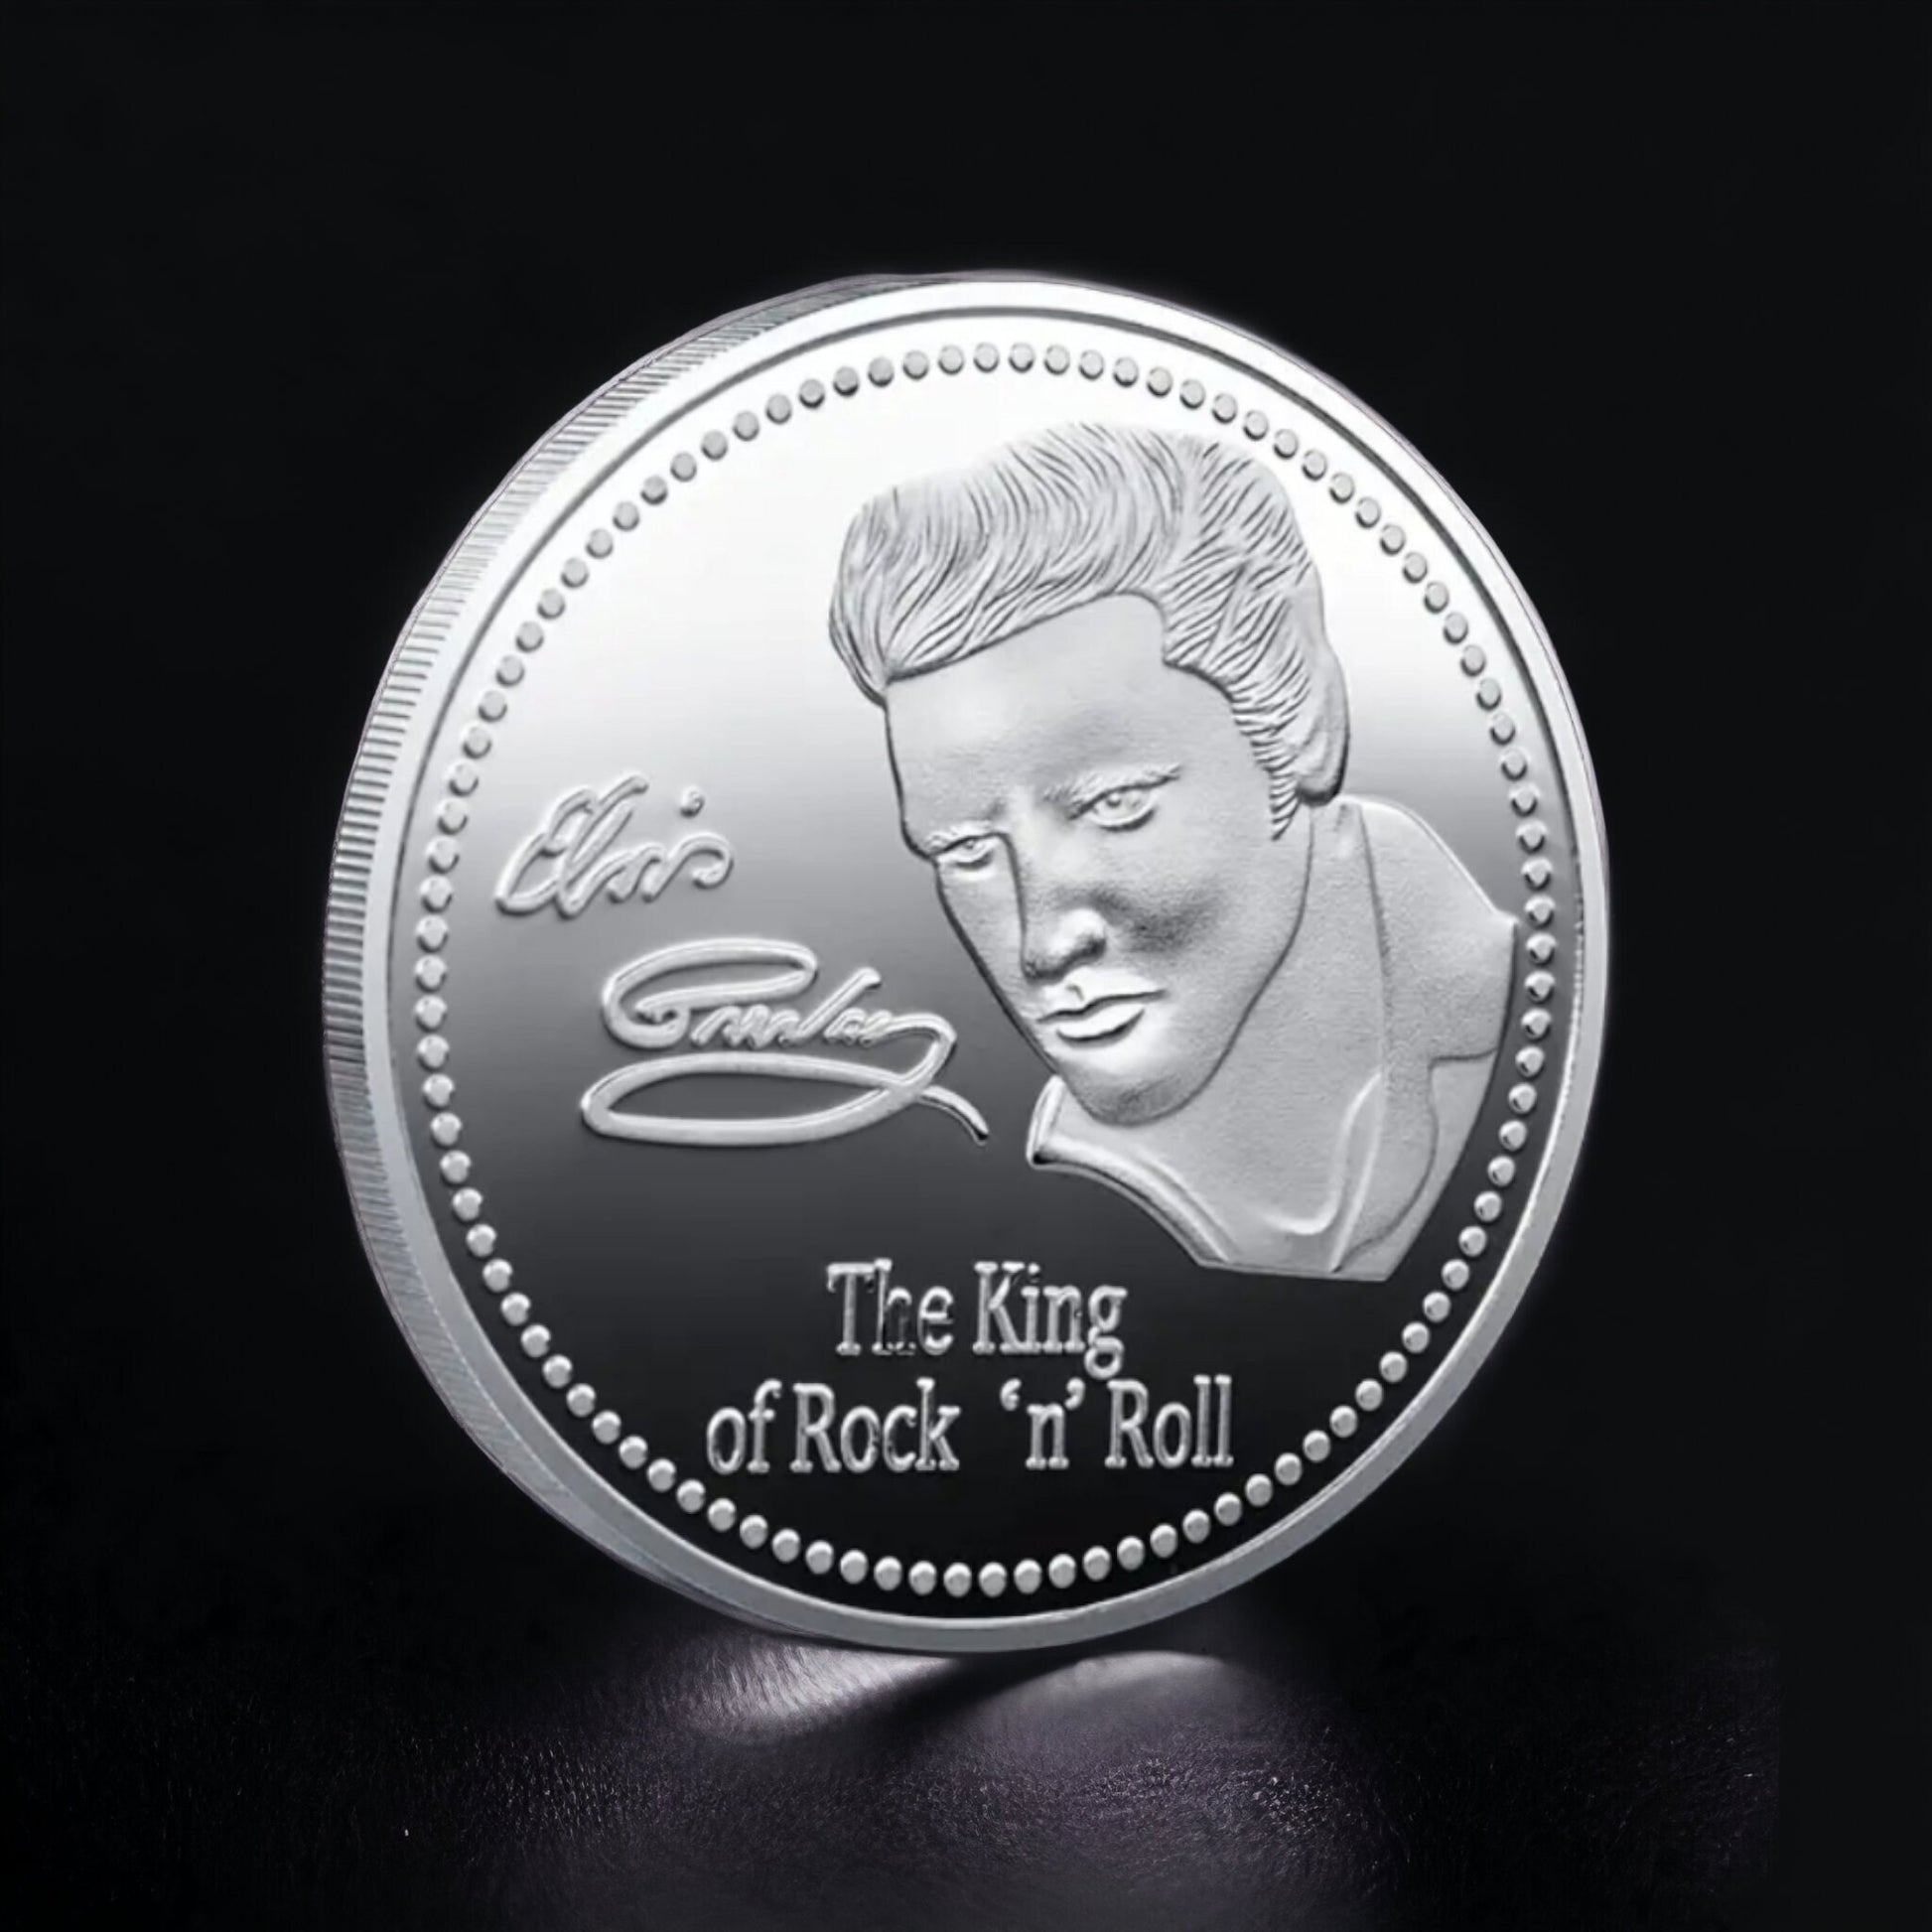 Elvis Presley silver plated coin commemorative souvenir coin King of rock and roll